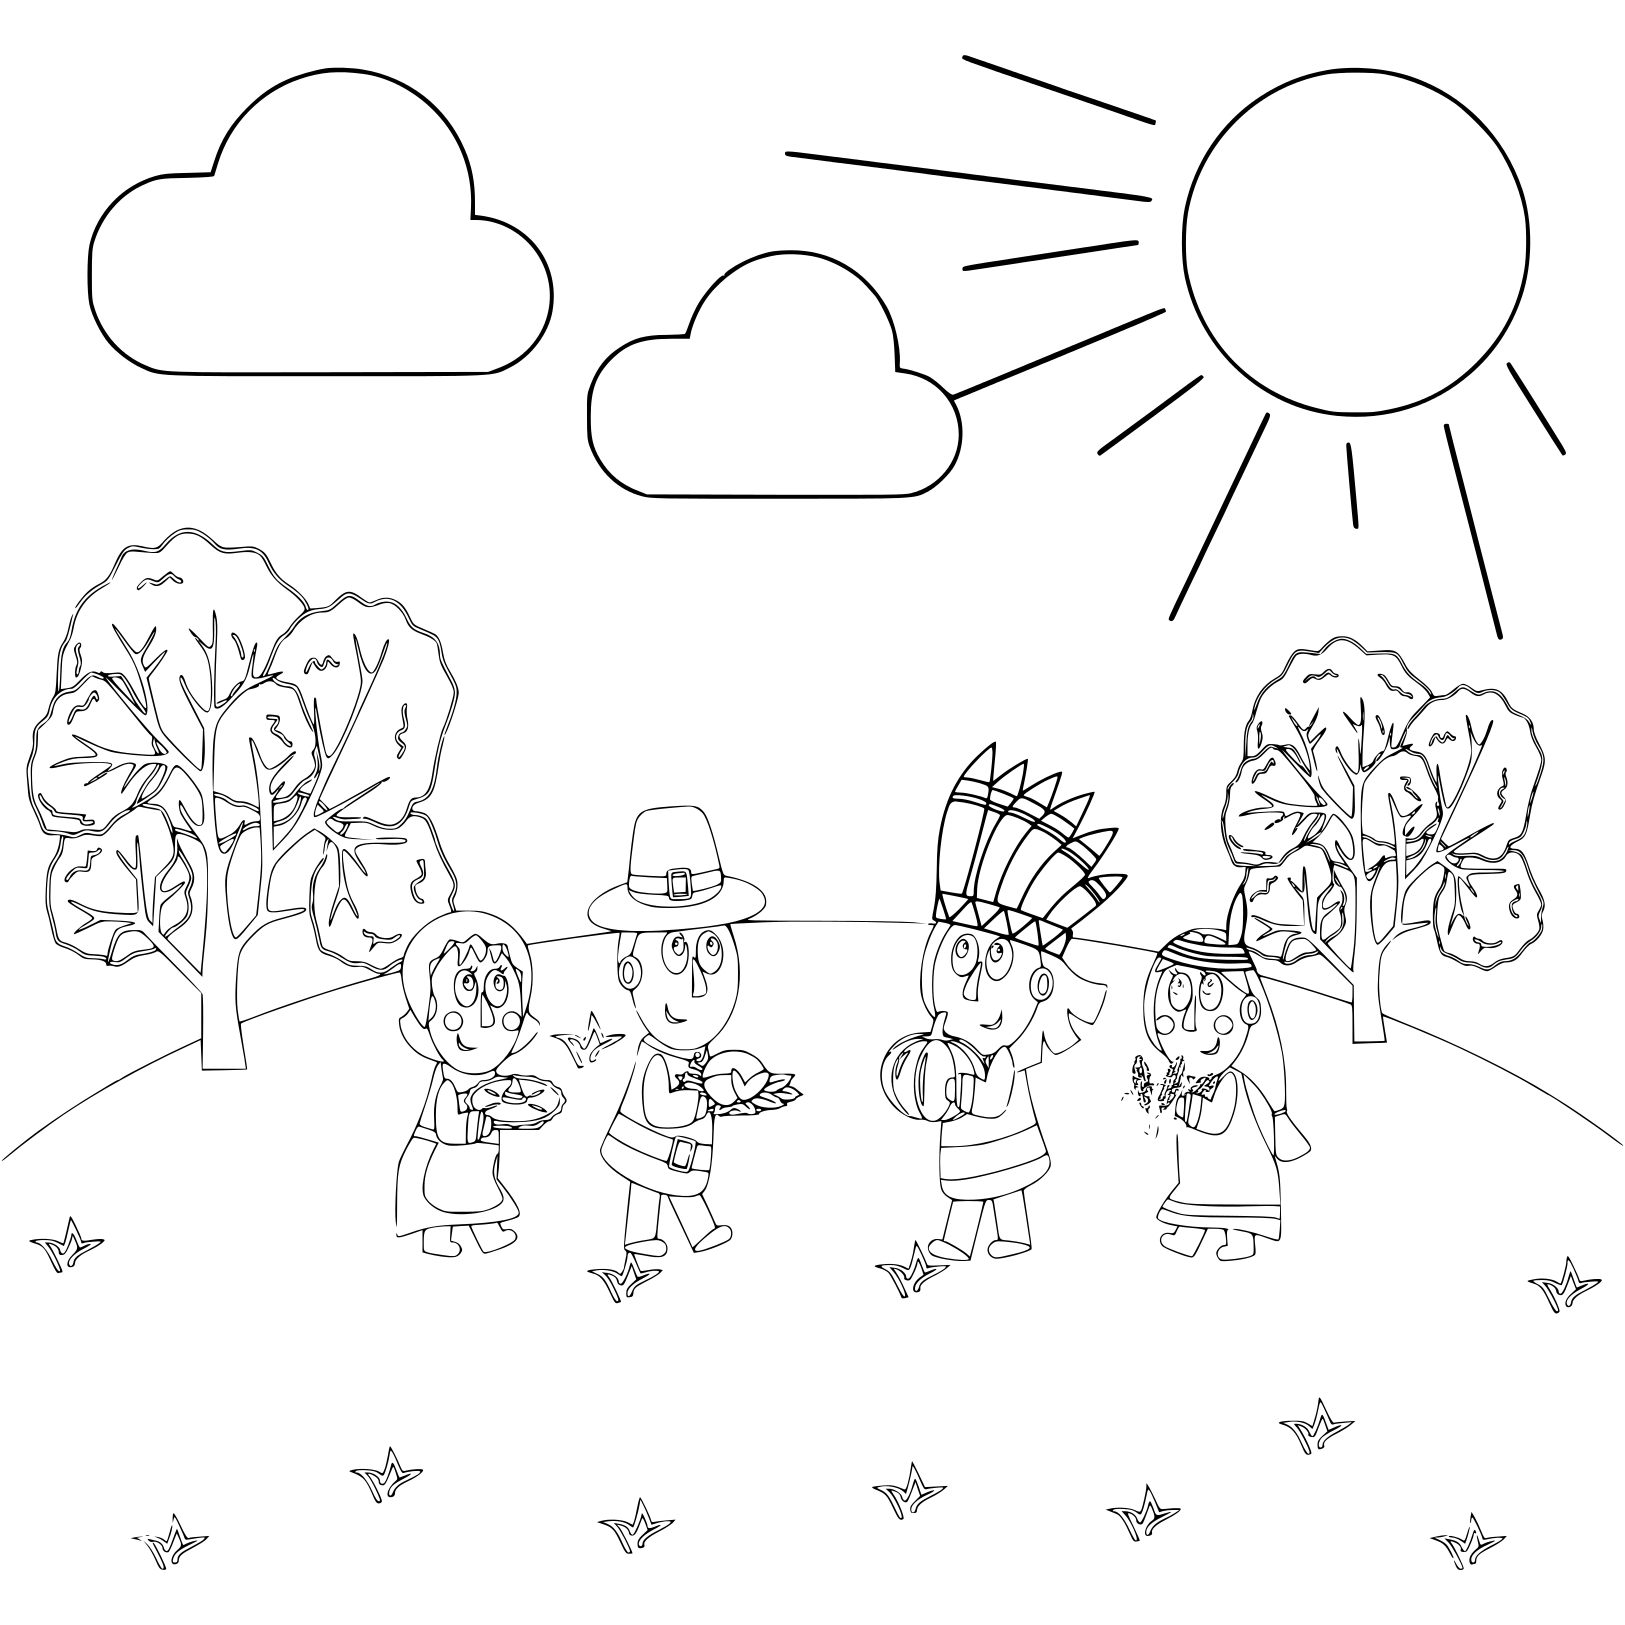 Thanksgiving Day Make New Friends Coloring Page